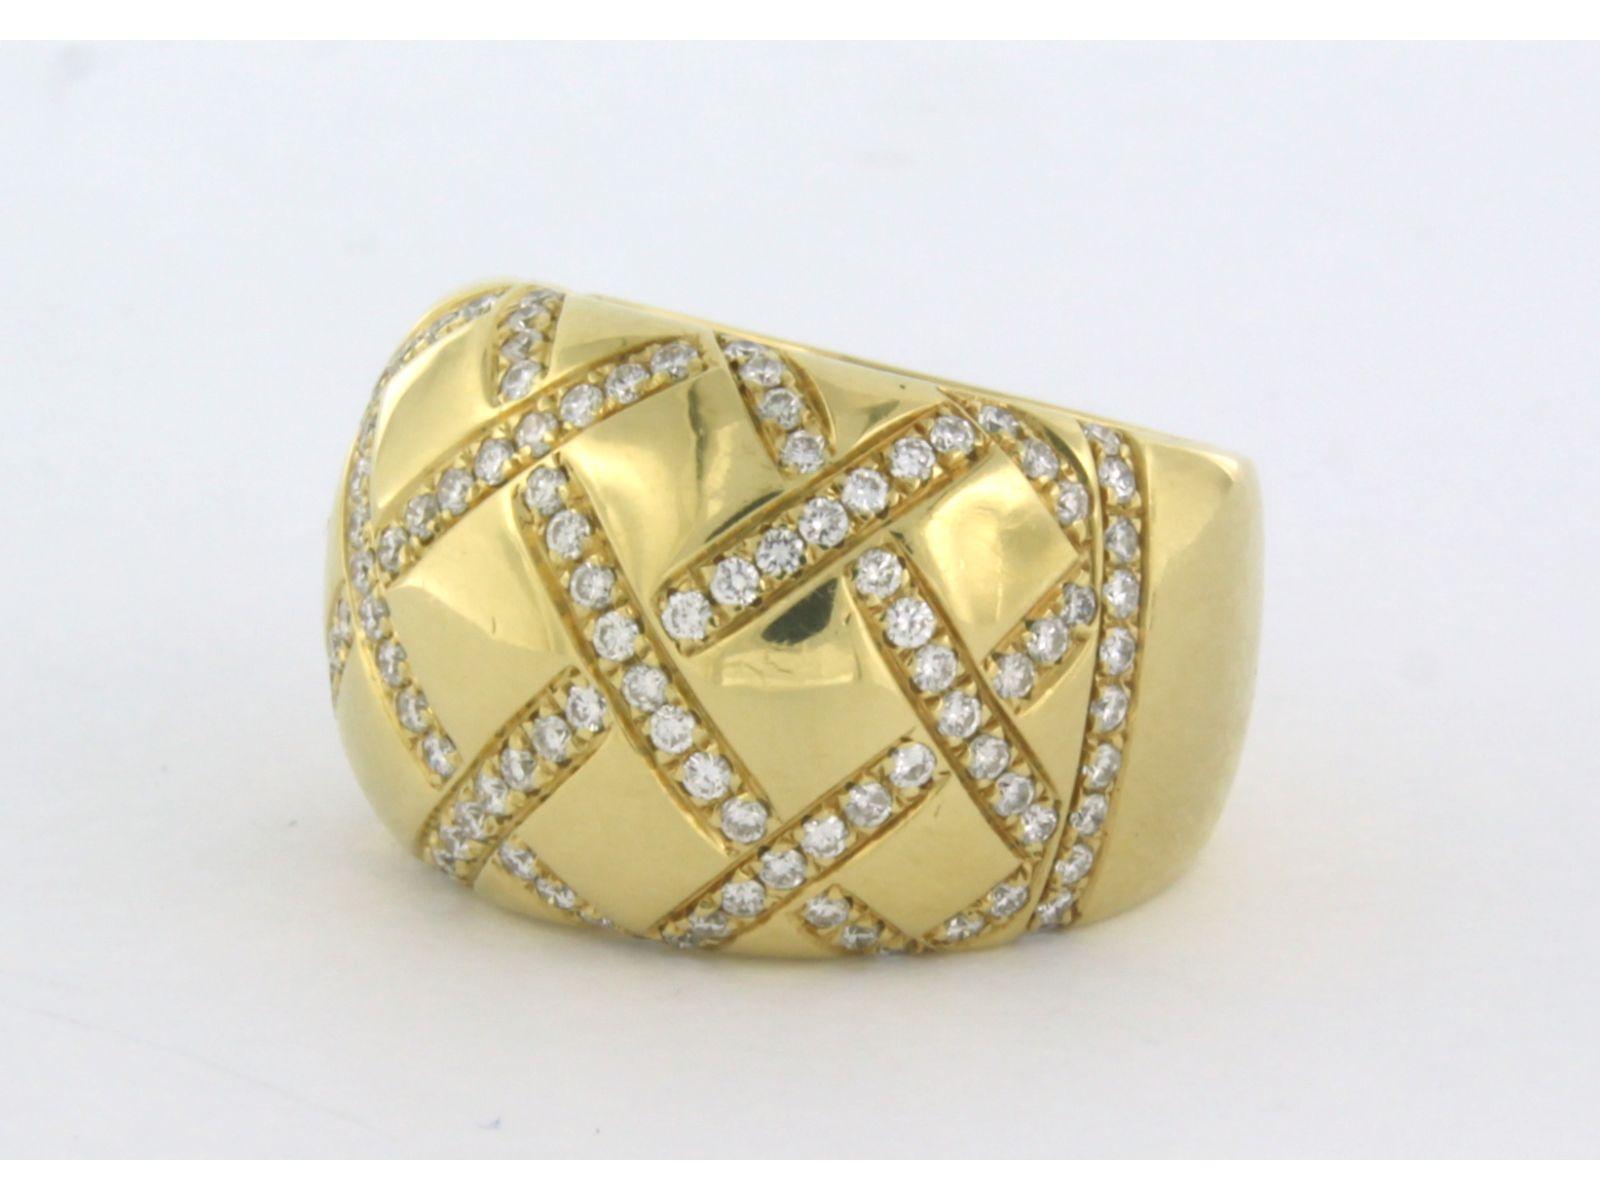 WEMPE - Ring with diamonds up to 1.38ct 18k yellow gold In Excellent Condition For Sale In The Hague, ZH